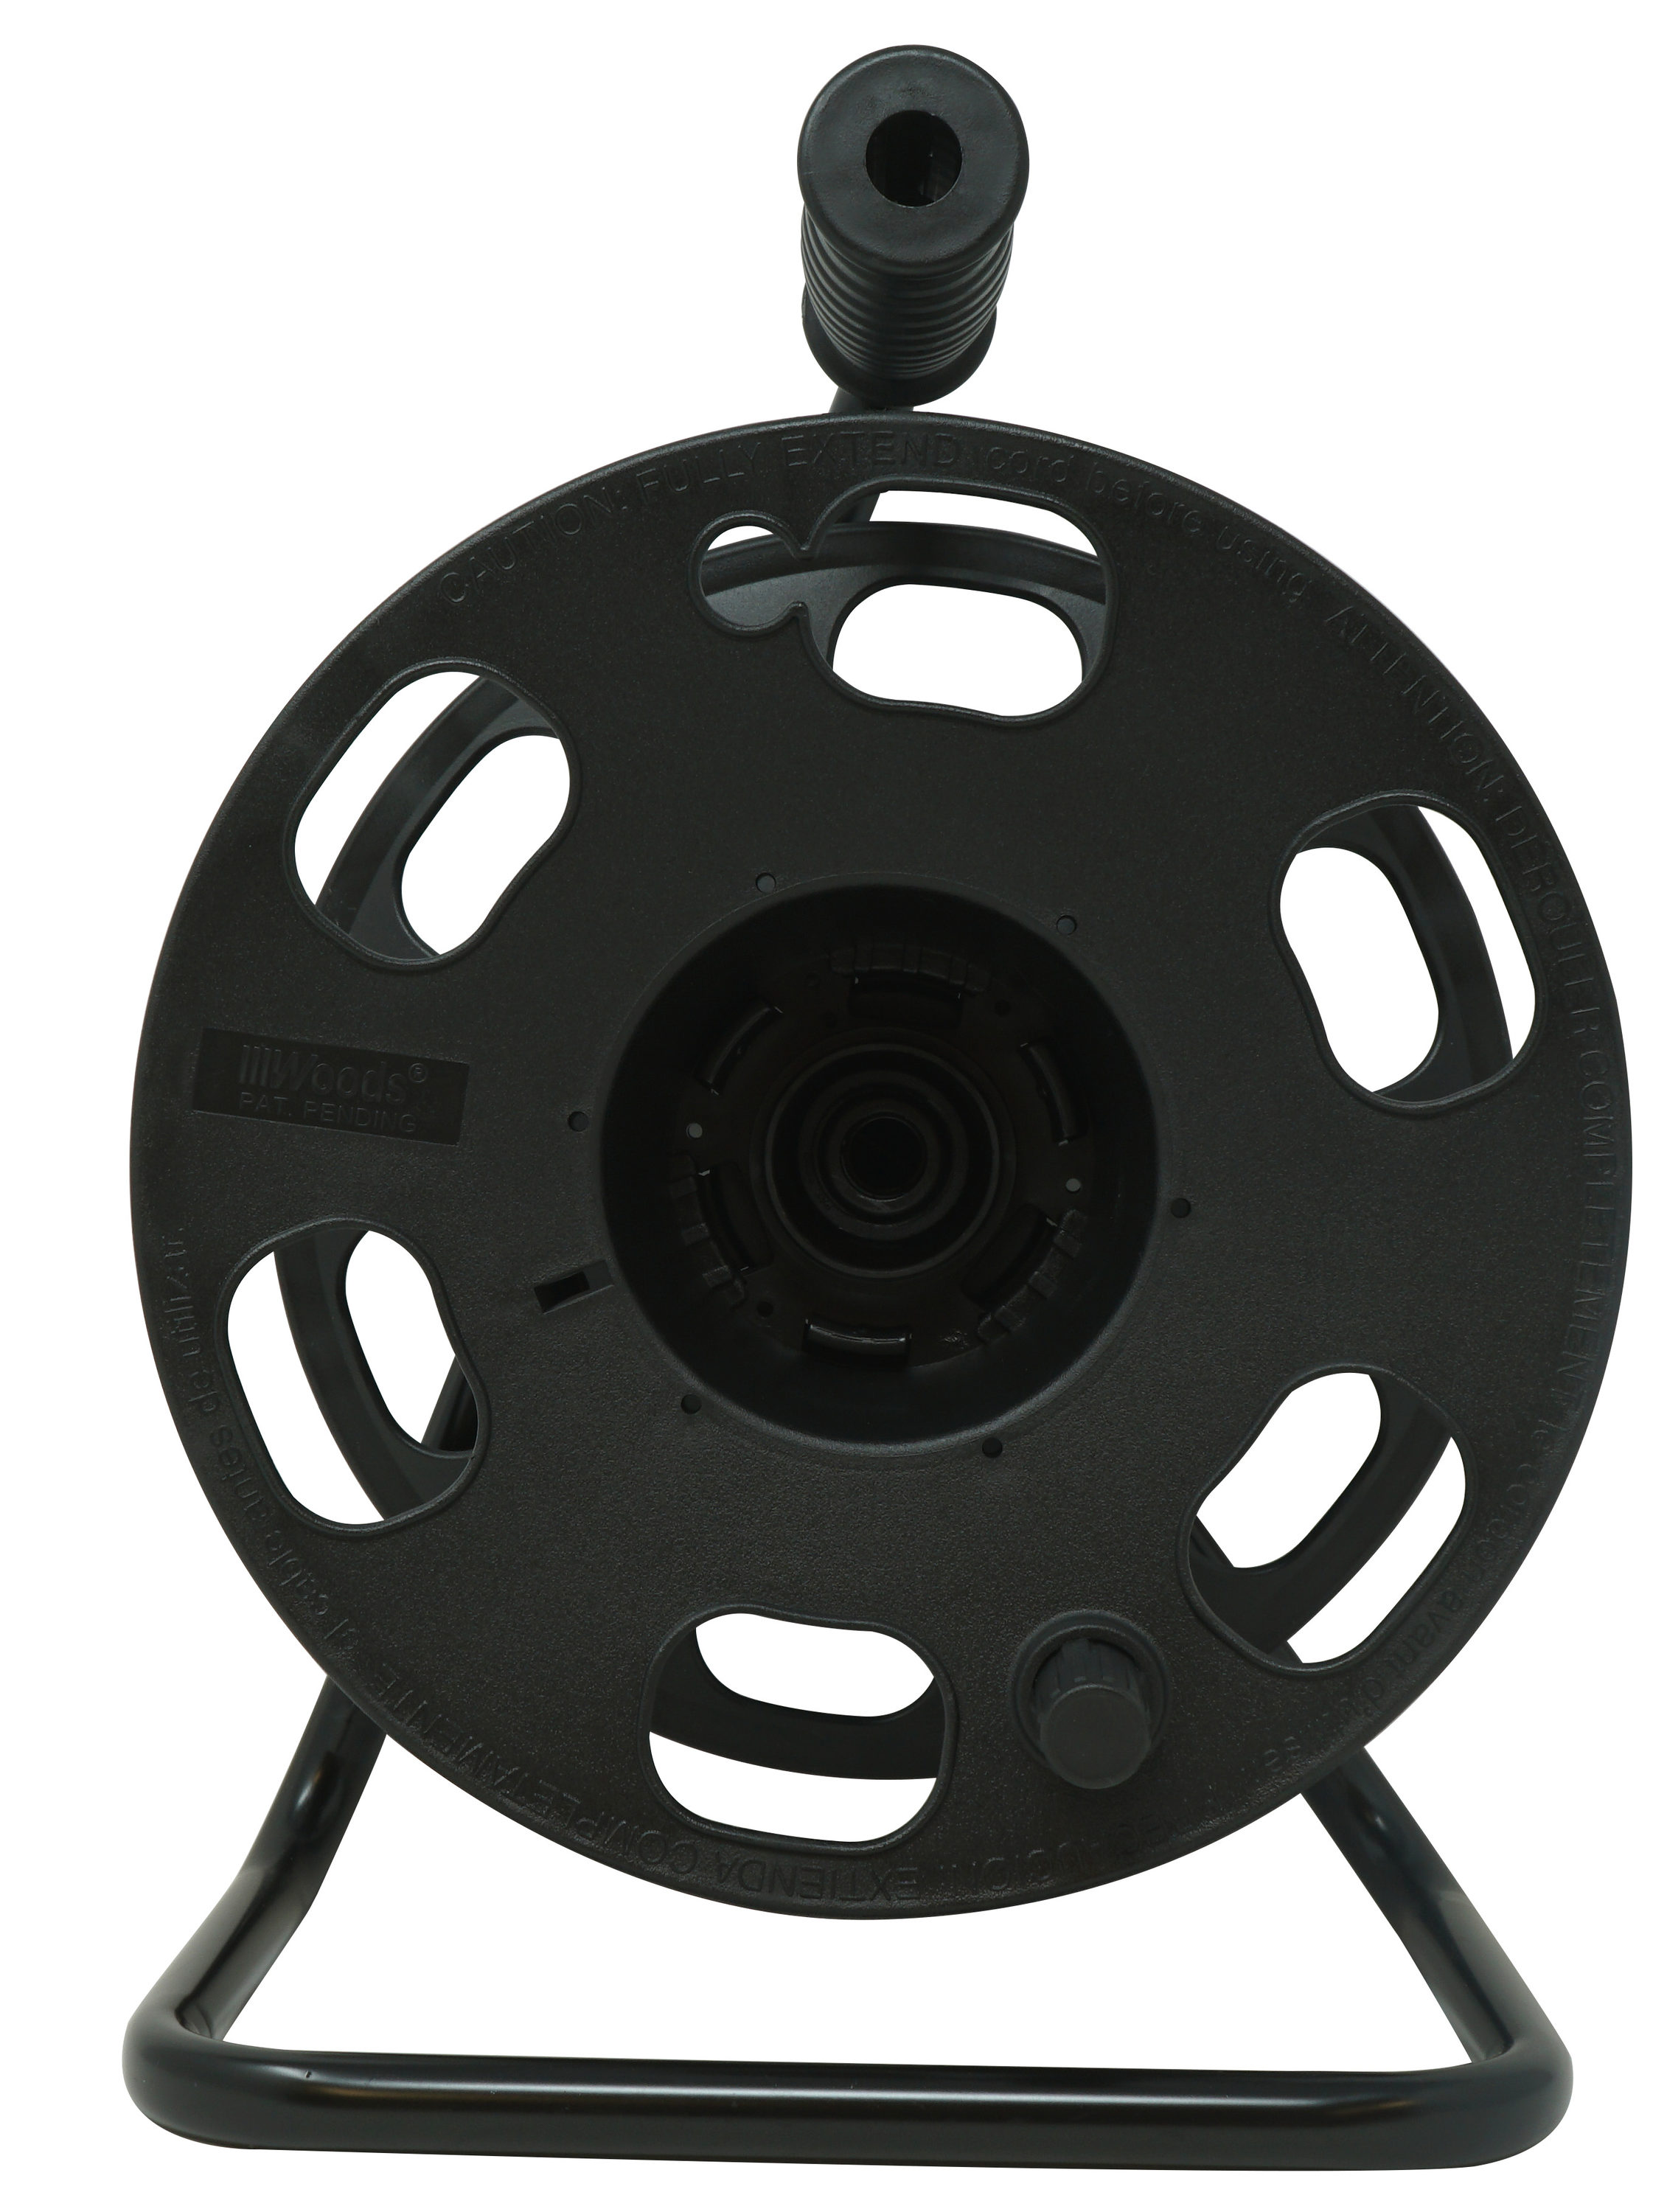 Southwire Metal Extension Cord Reel Stand In Black in the